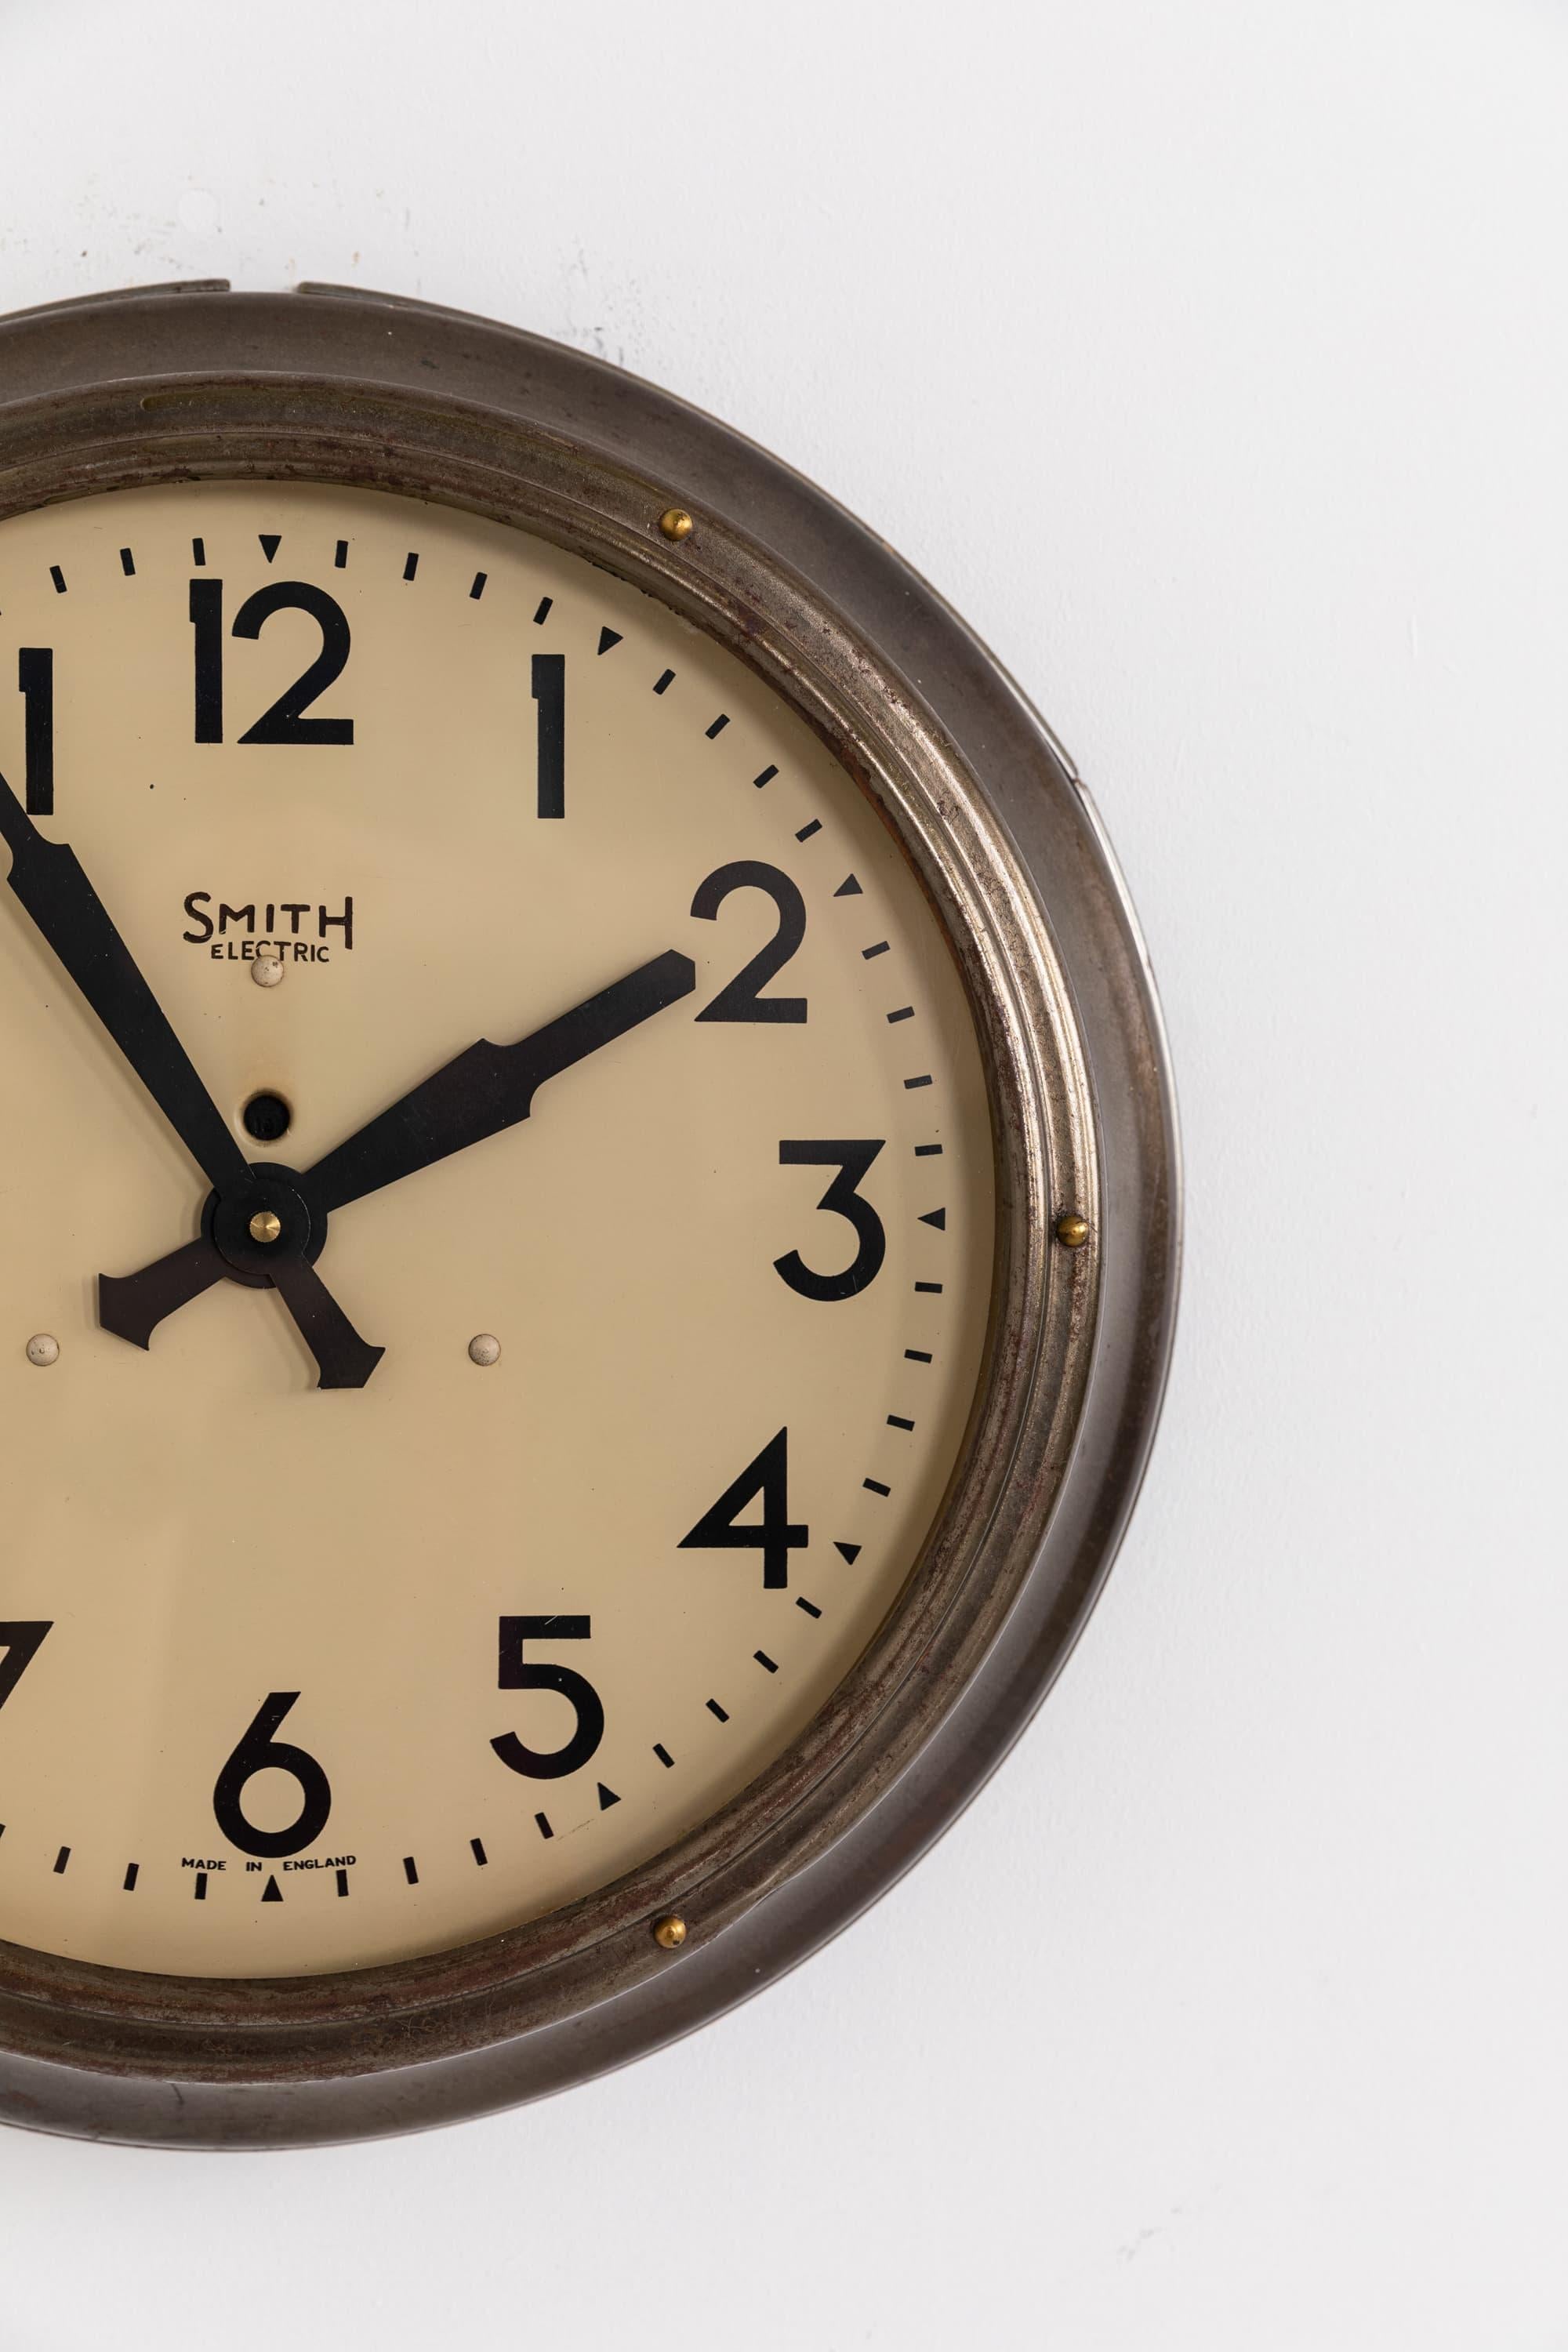 A very nice example of the iconic industrial wall clock by Smiths English Clock Systems. circa 1930

Surviving in amazing condition, this clock pre-dates the 1937 switch over to the Sectric branding. The 12